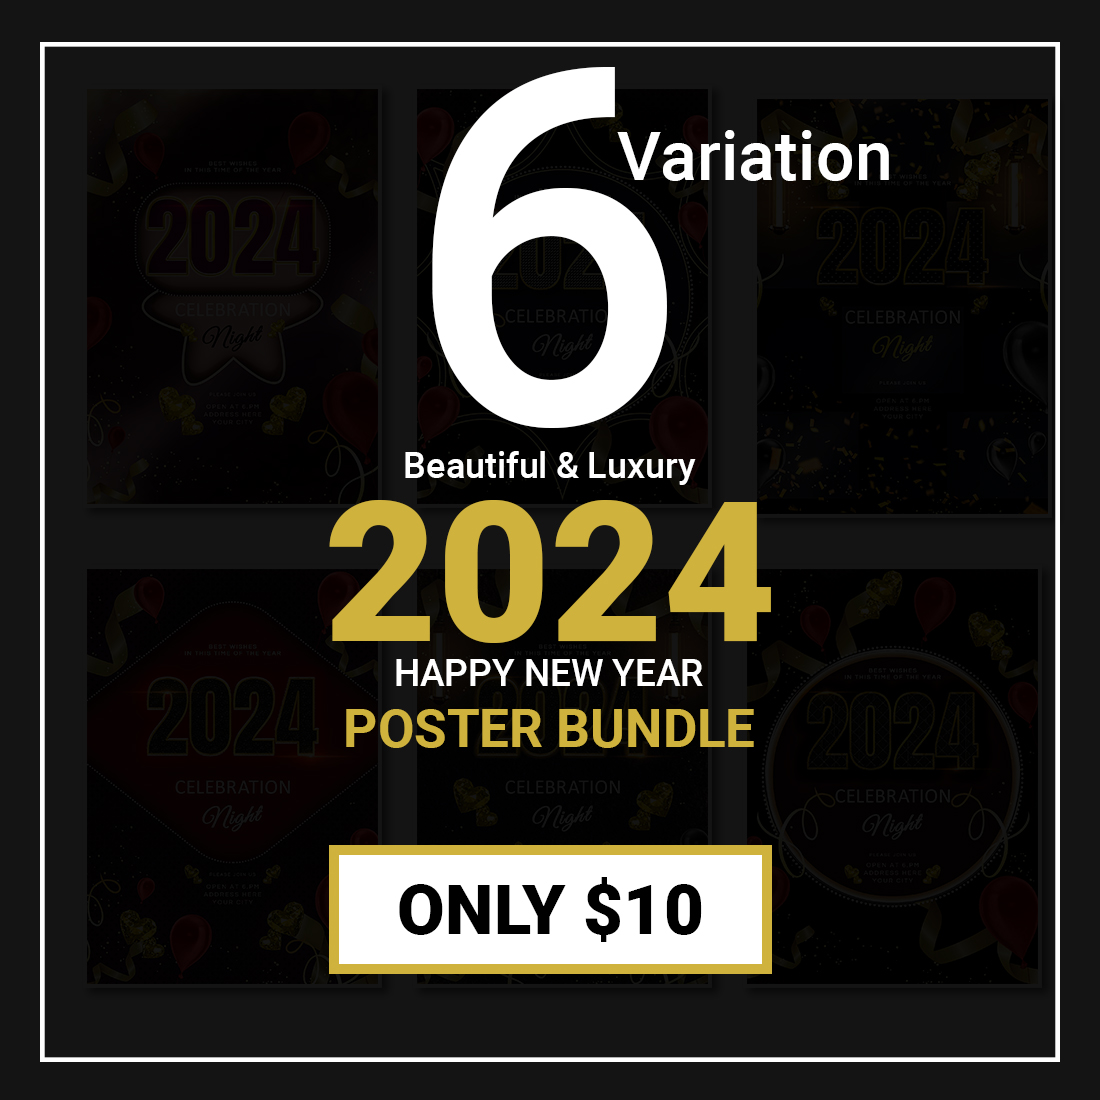 6 in 1 Beautiful & Luxury 2024 Happy New Year Poster Bundle Only $10 cover image.